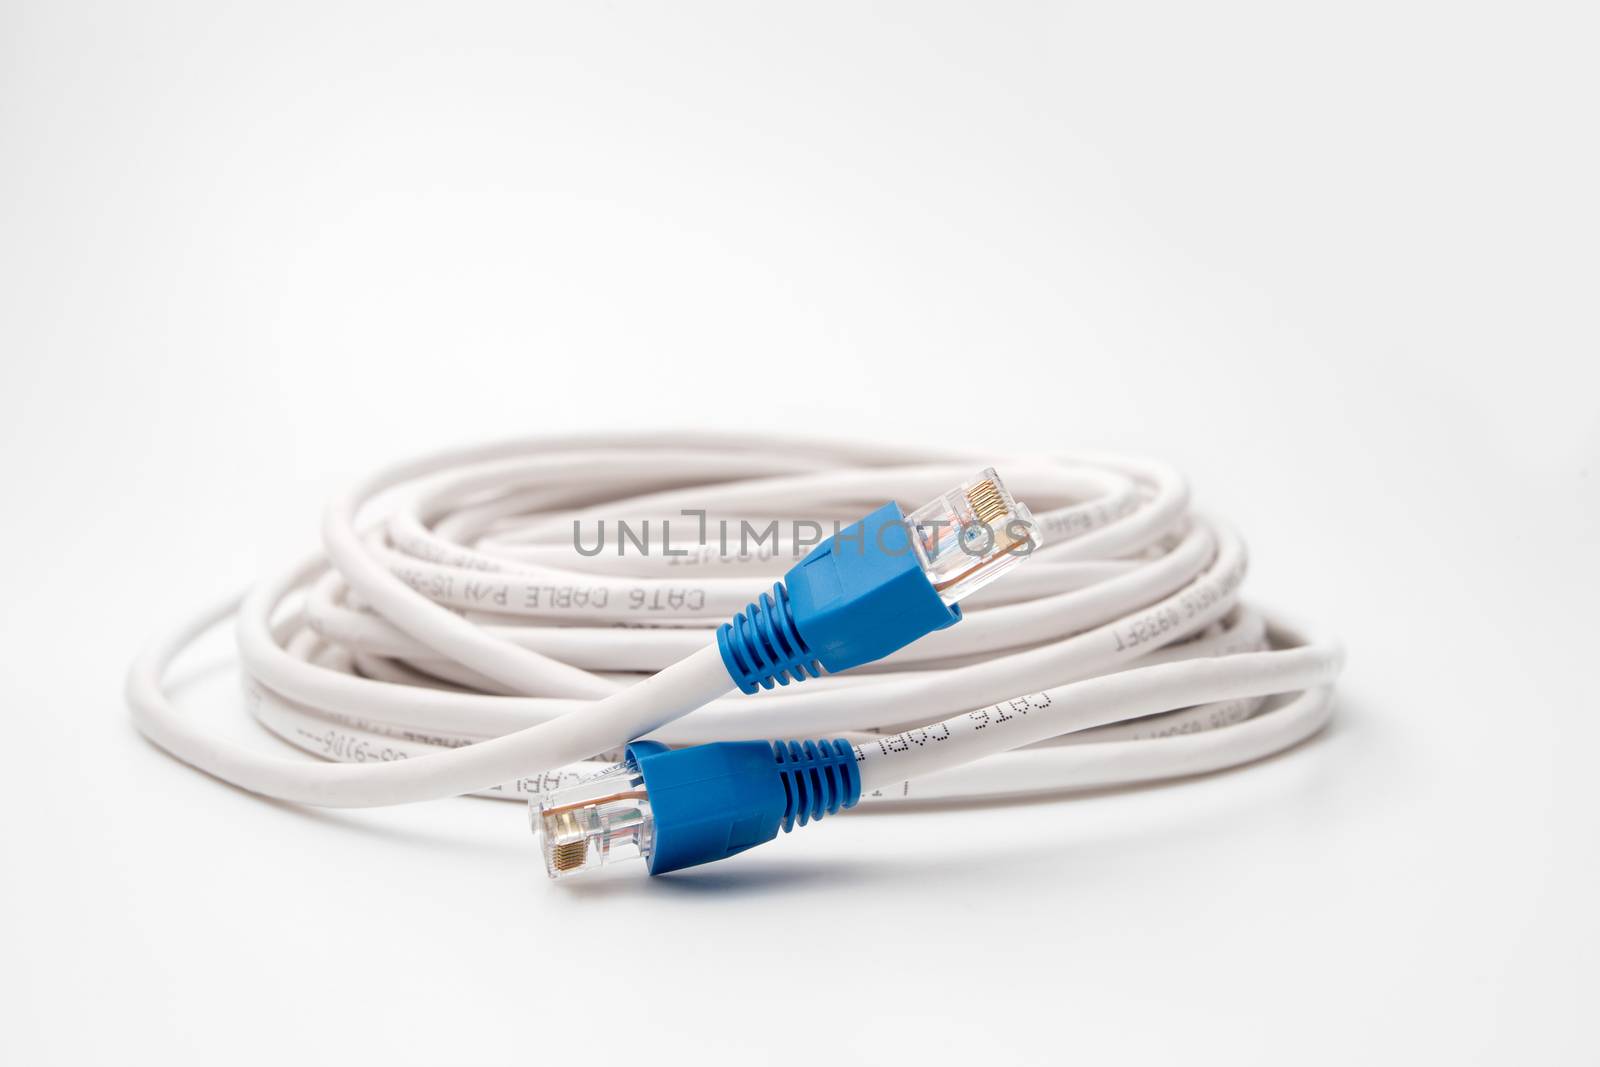 white network cable by antpkr